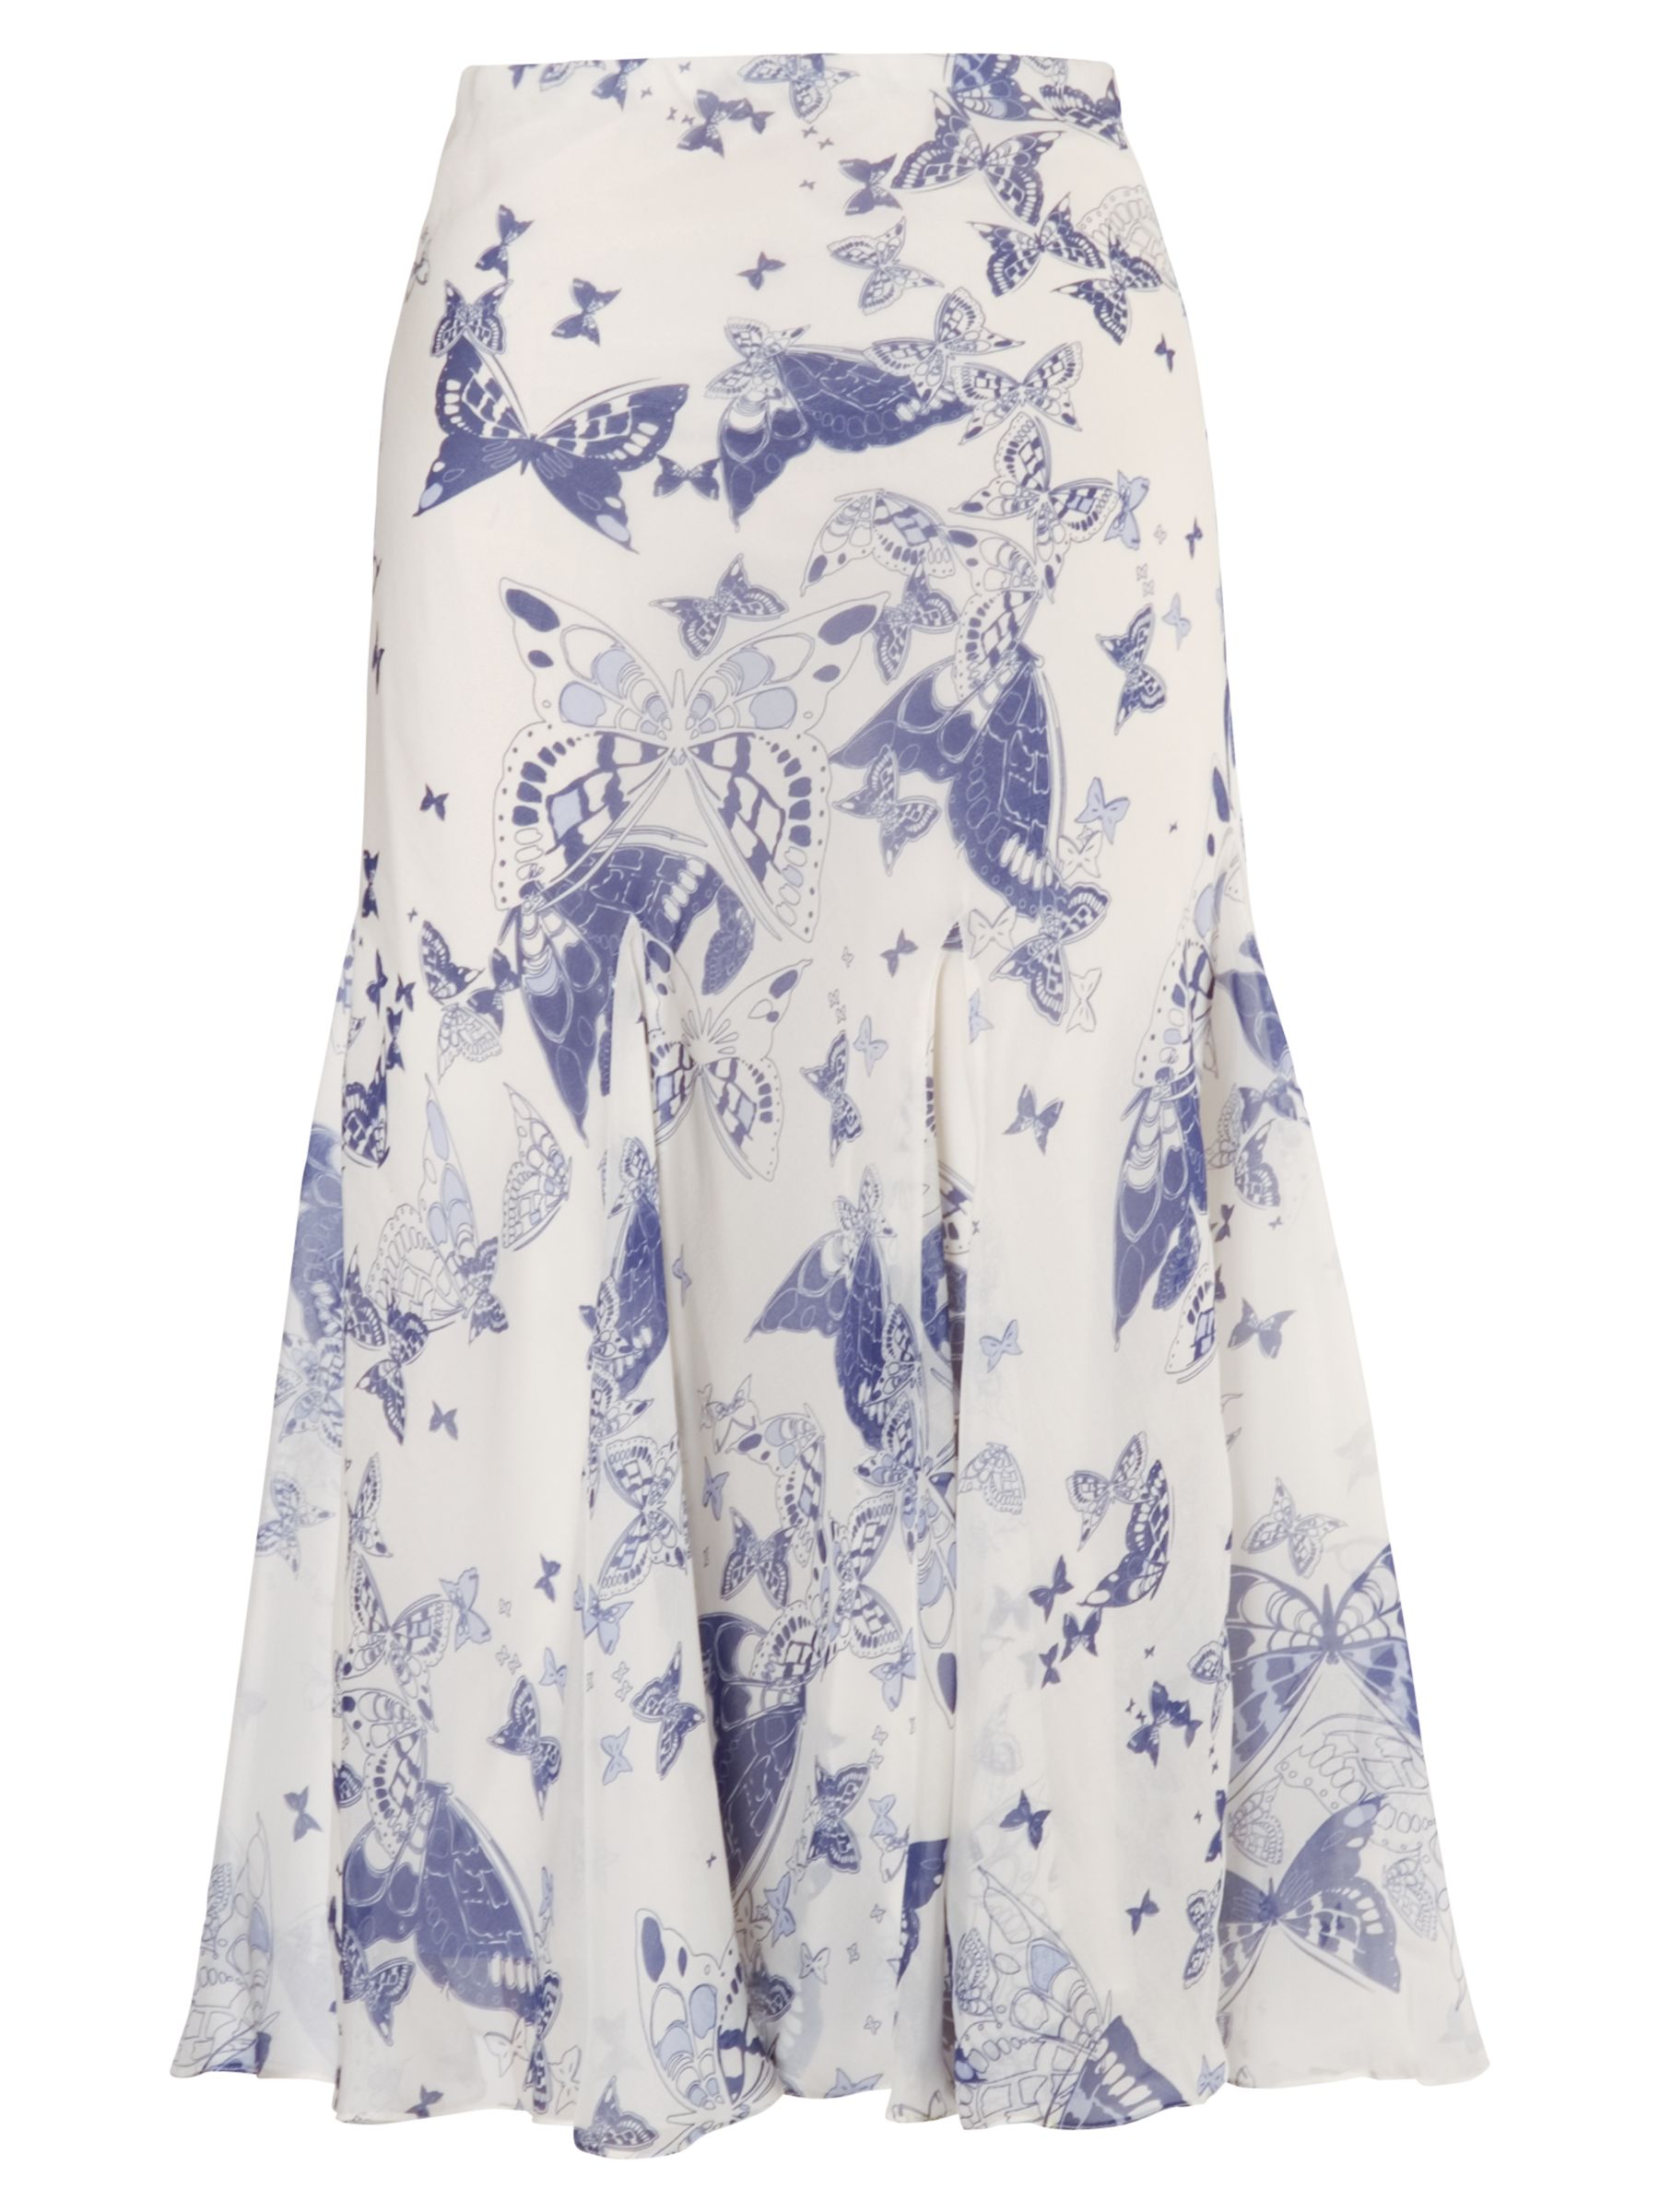 Chesca Butterfly Print Silk Skirt, Ivory/Navy at John Lewis & Partners